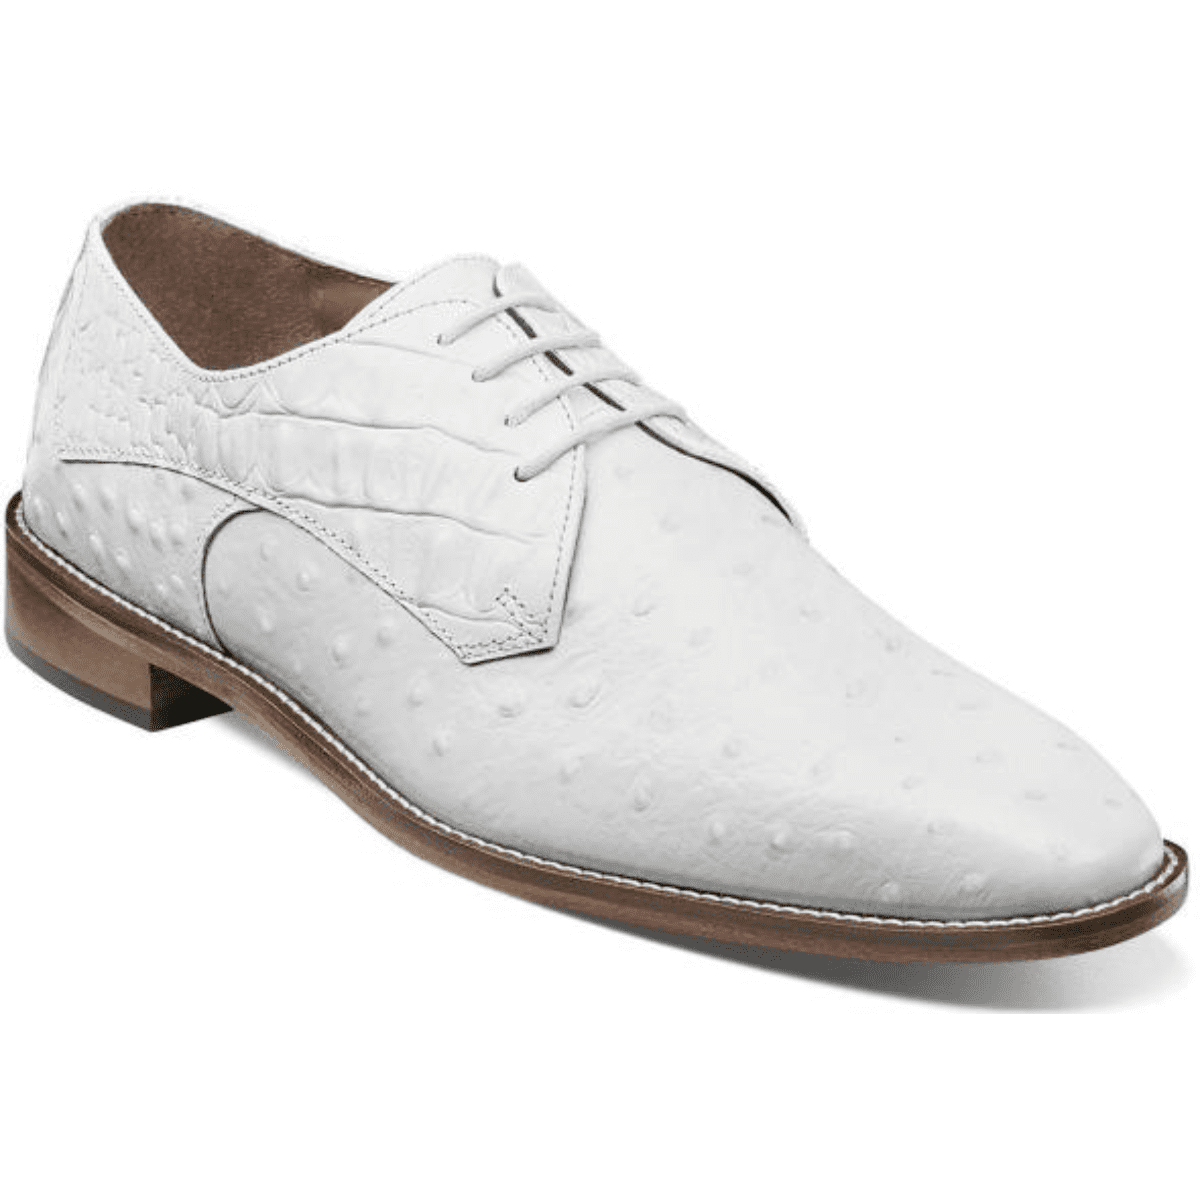 Stacy Adams - Stacy Adams Russo Men's Shoes Oxford White 25273-100 ...